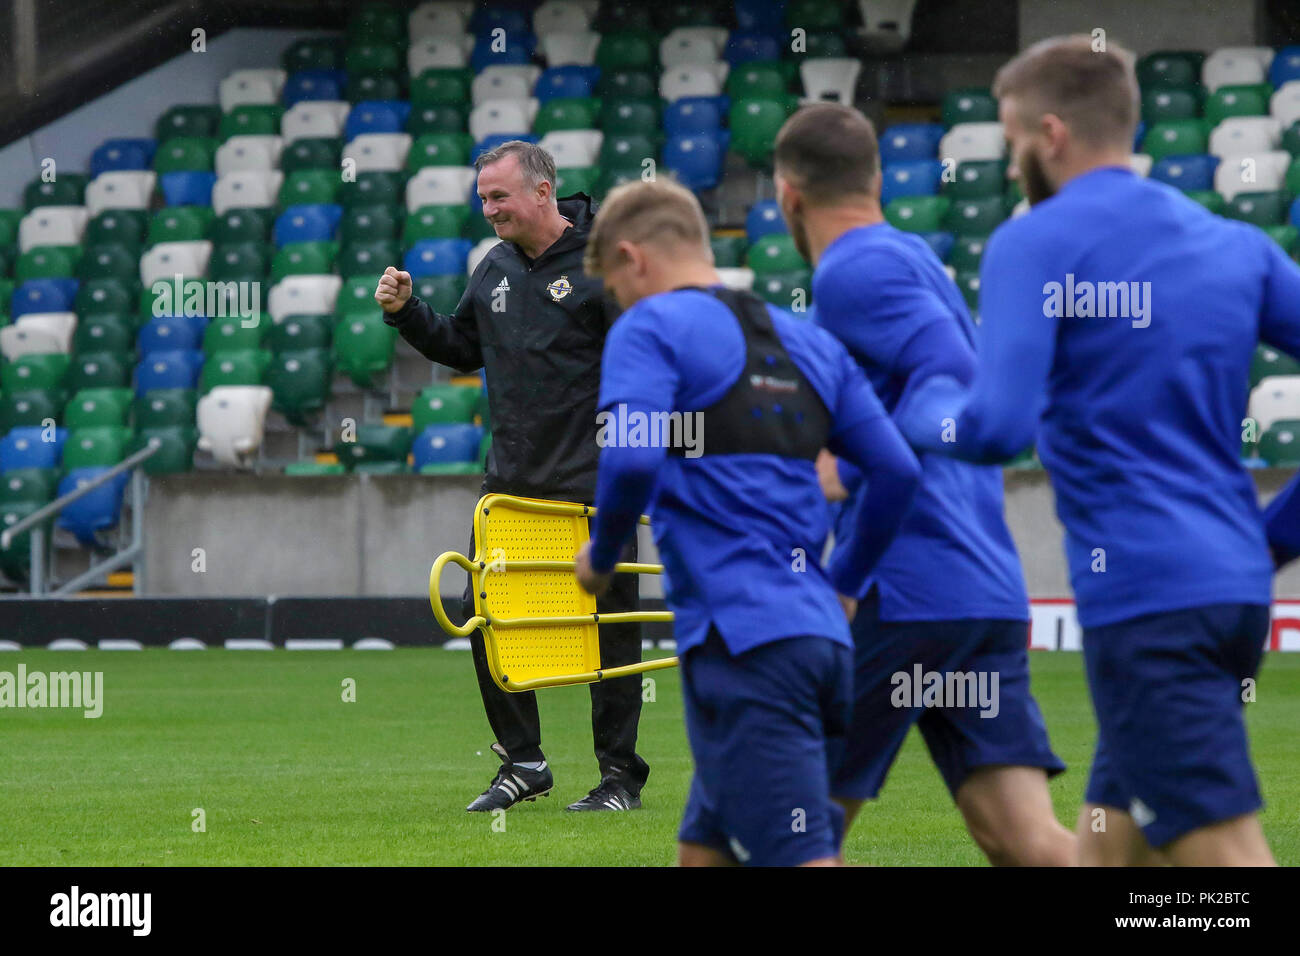 Windsor Park, Belfast, Northern Ireland. 10 September 2018. After Saturday's defeat in the UEFA Nations League, Northern Ireland returned to training this morning at Windsor Park. Tomorrow night they play Israel in a friendly international. Michael O'Neill at this morning's session. Credit: David Hunter/Alamy Live News. Stock Photo